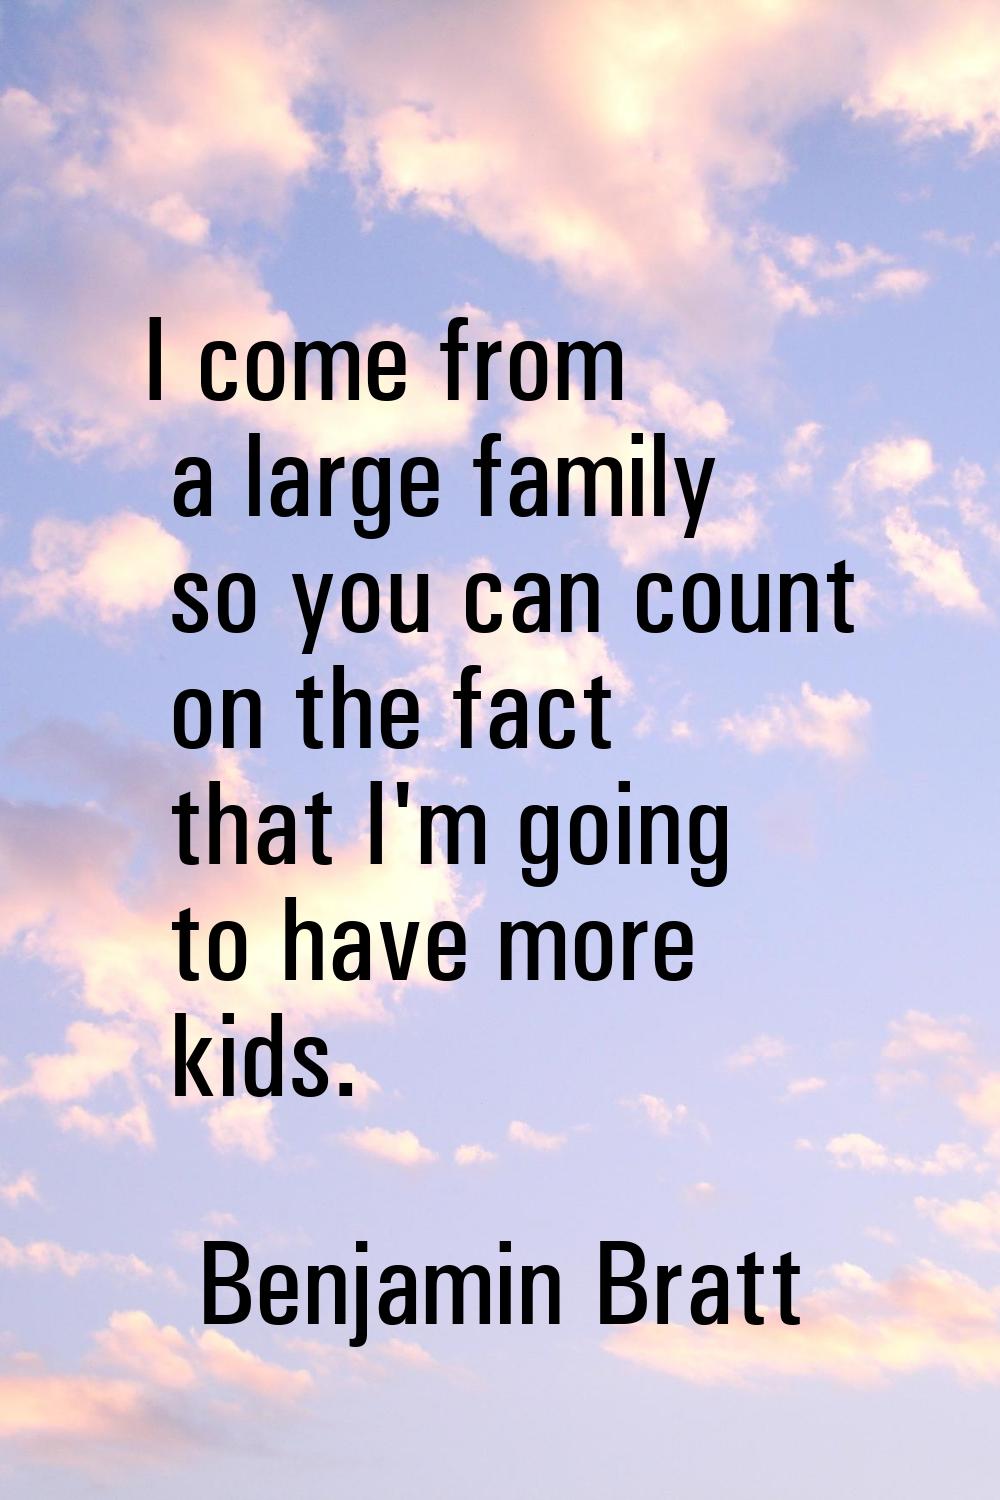 I come from a large family so you can count on the fact that I'm going to have more kids.